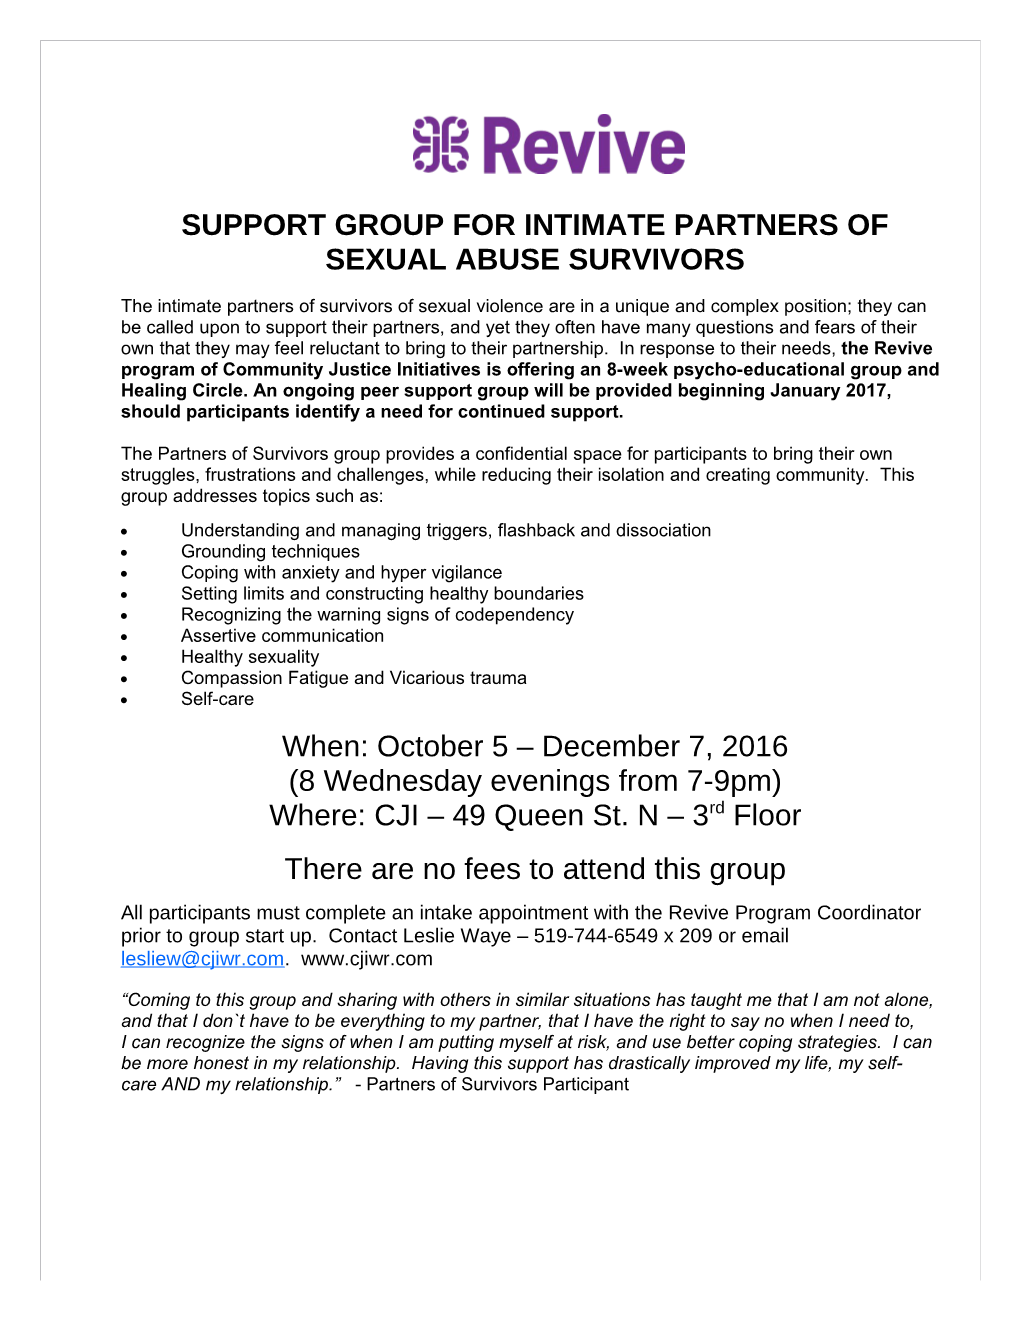 Support Group for Intimate Partners of Sexual Abuse Survivors